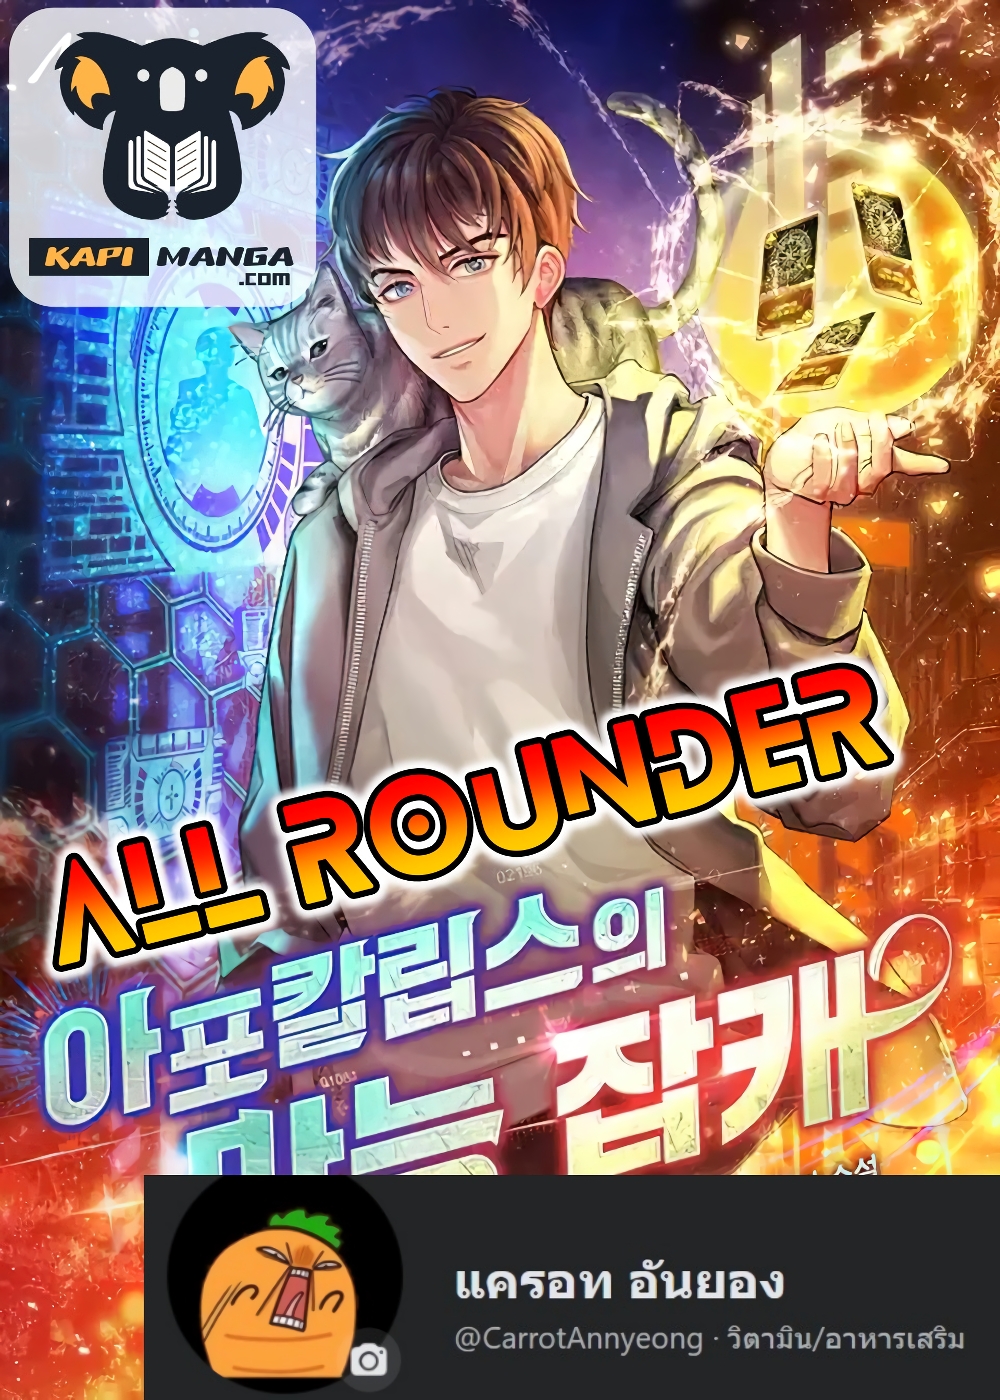 All Rounder11 (1)